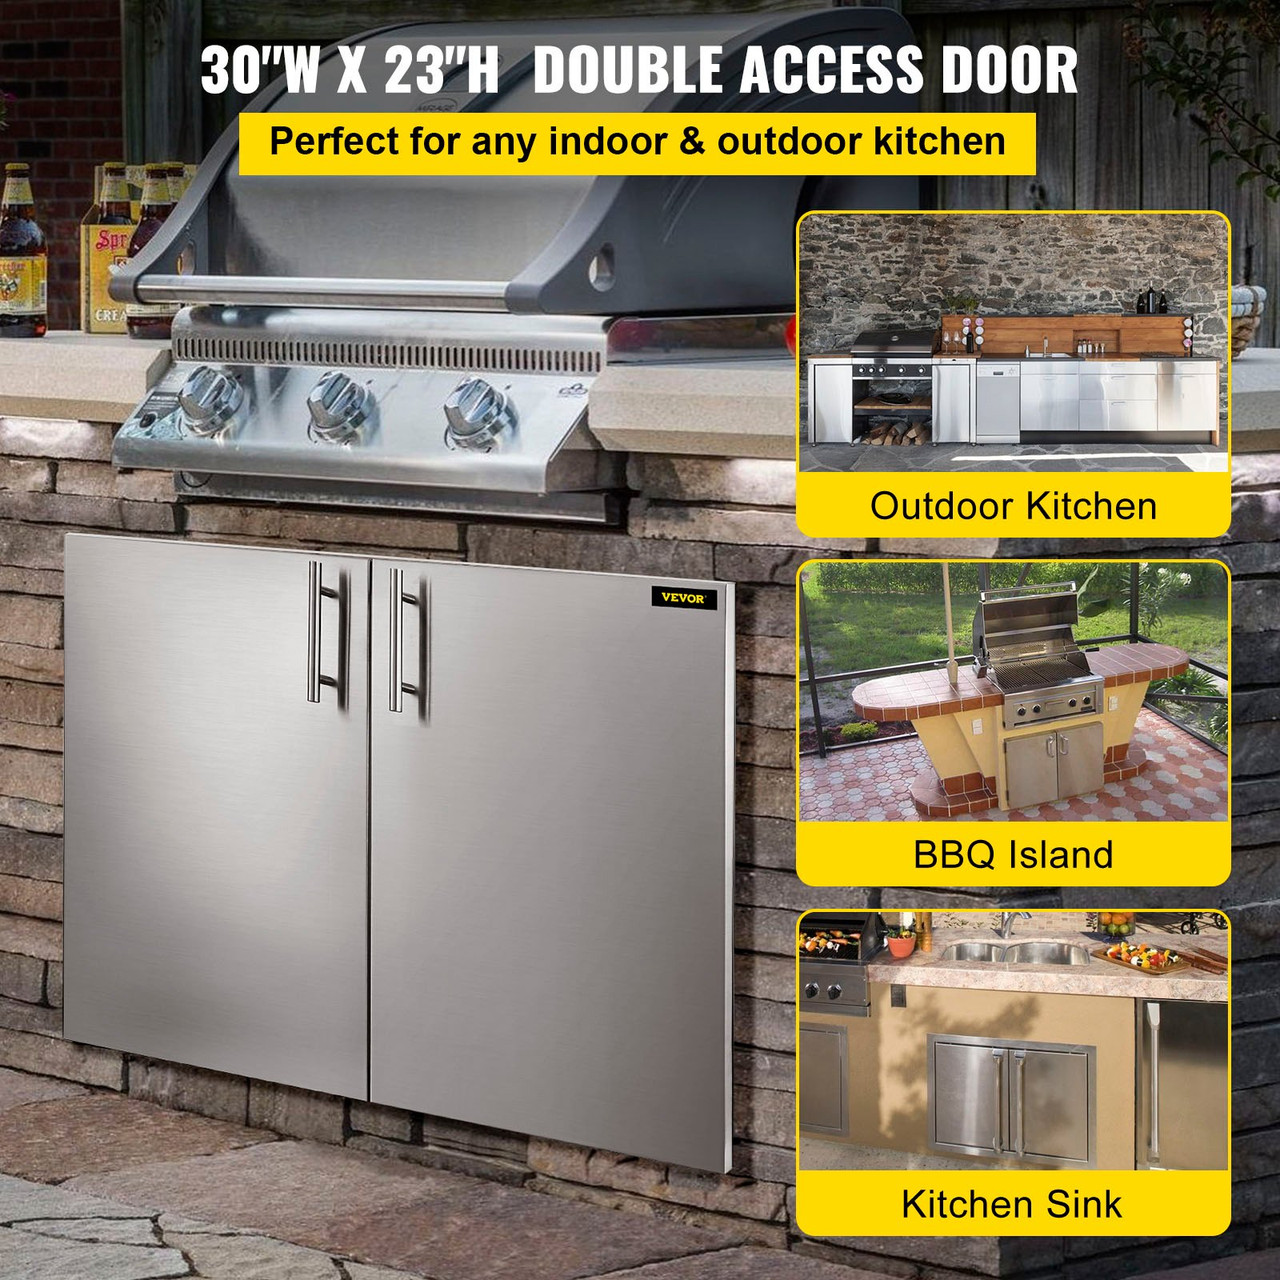 Outdoor Kitchen Access 30"x 23" Wall Construction Stainless Steel Flush Mount for BBQ Island, 30inch x23inch, Double Door with Built-in Basket